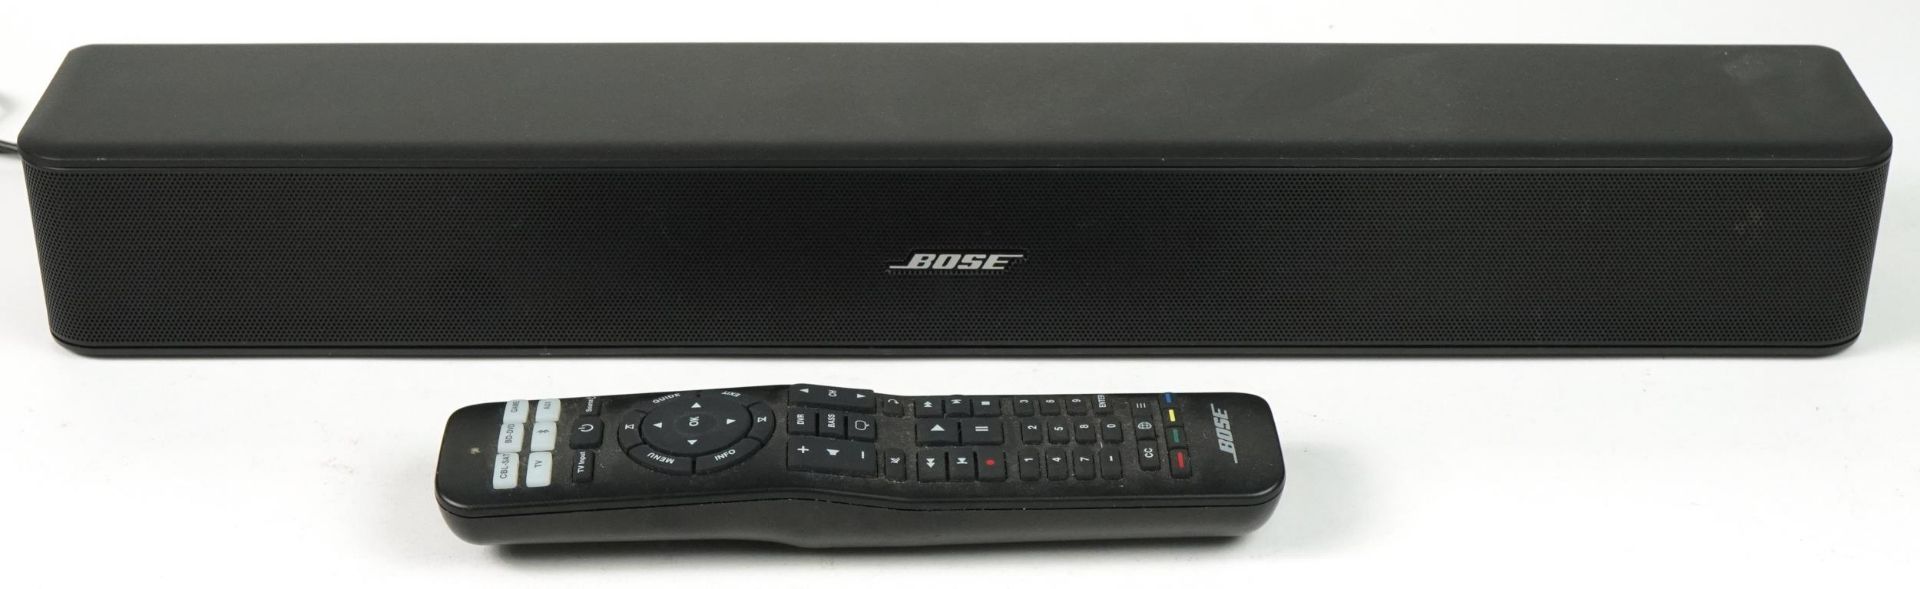 Bose sound bar with remote controls, the sound bar model 418775 : For further information on this - Image 2 of 4